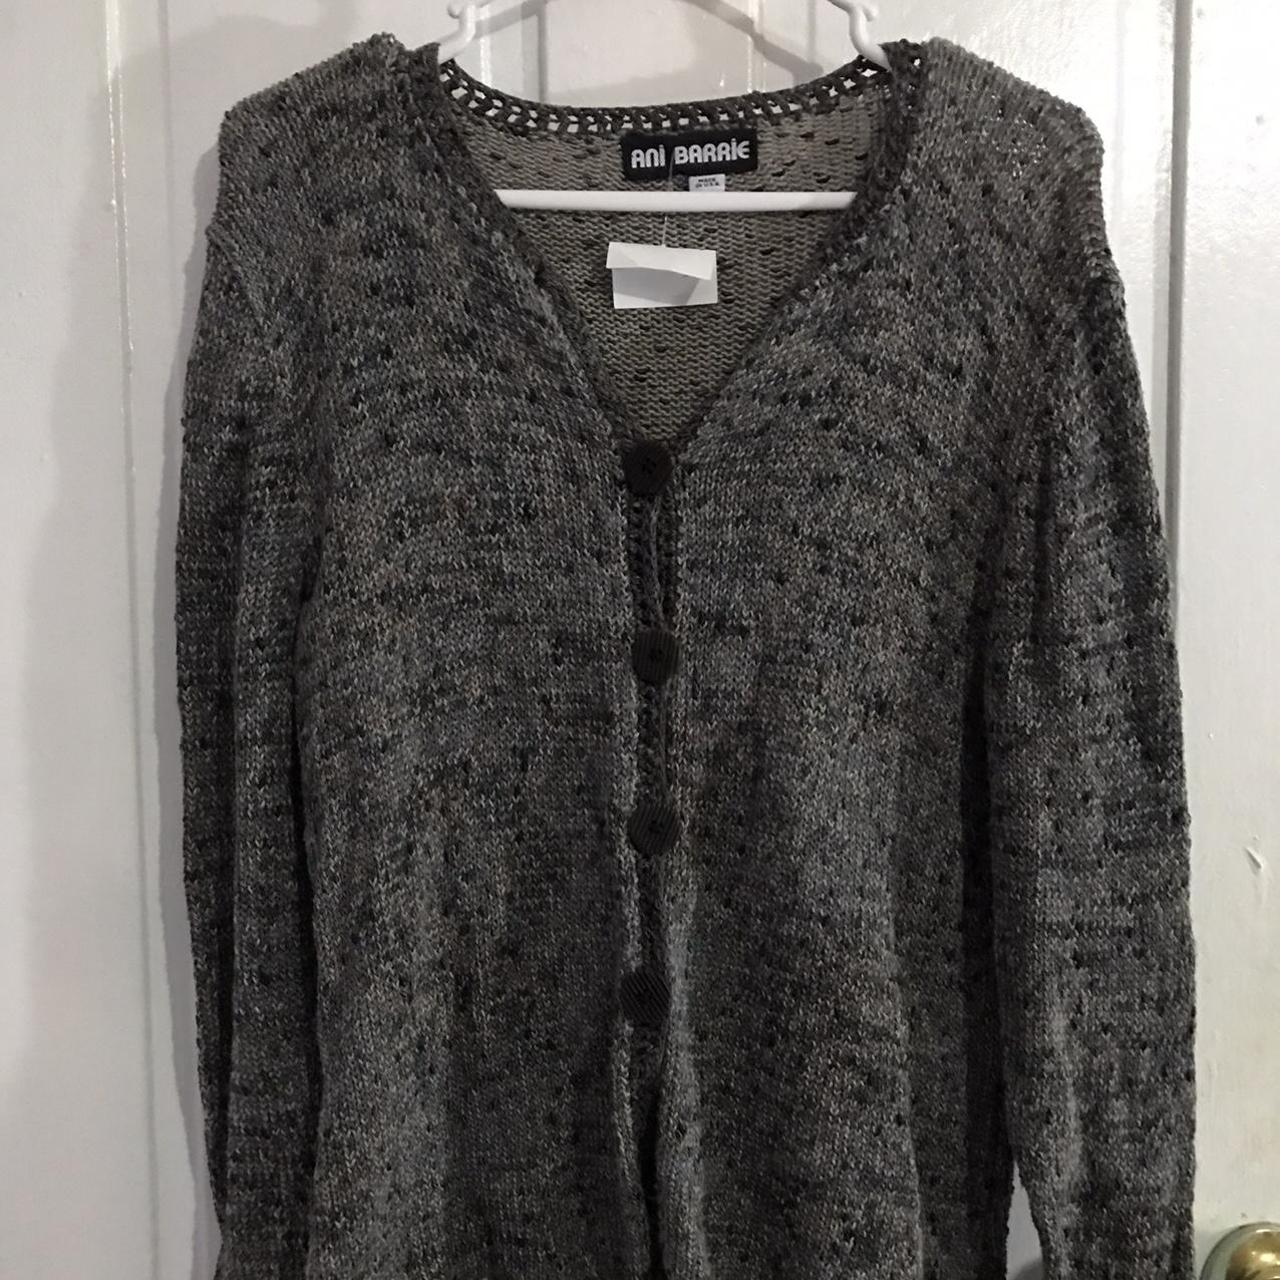 Grungey early 2000s style cardigan! Reminds me of... - Depop